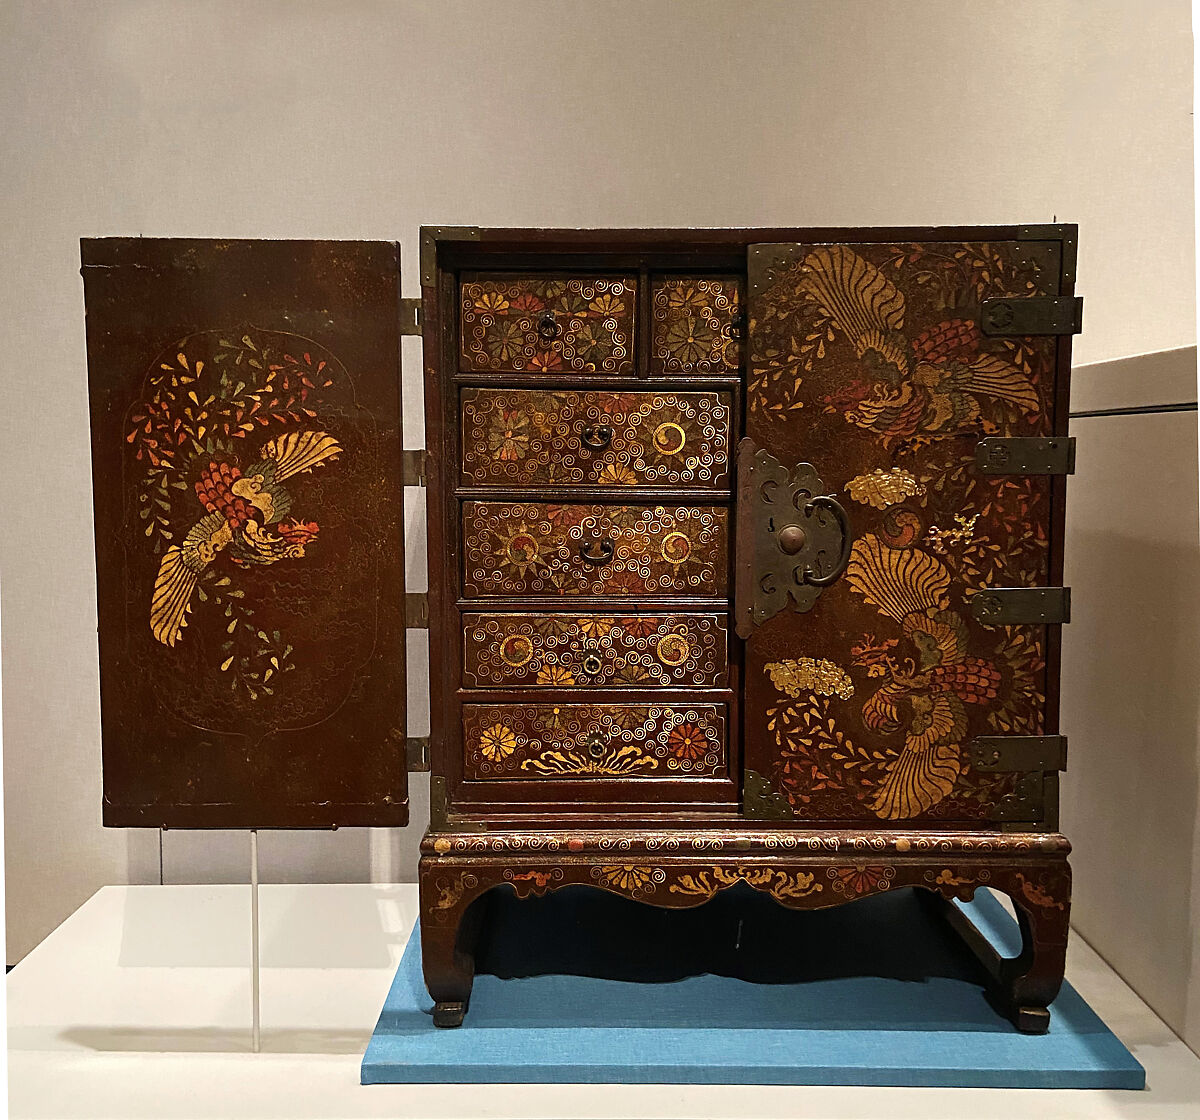 Chest decorated with phoenixes, colored roundels (taegeuk), and flowers, Lacquered wood inlaid with mother-of-pearl, tortoiseshell, ray skin, and brass wire; brass fittings, Korea 